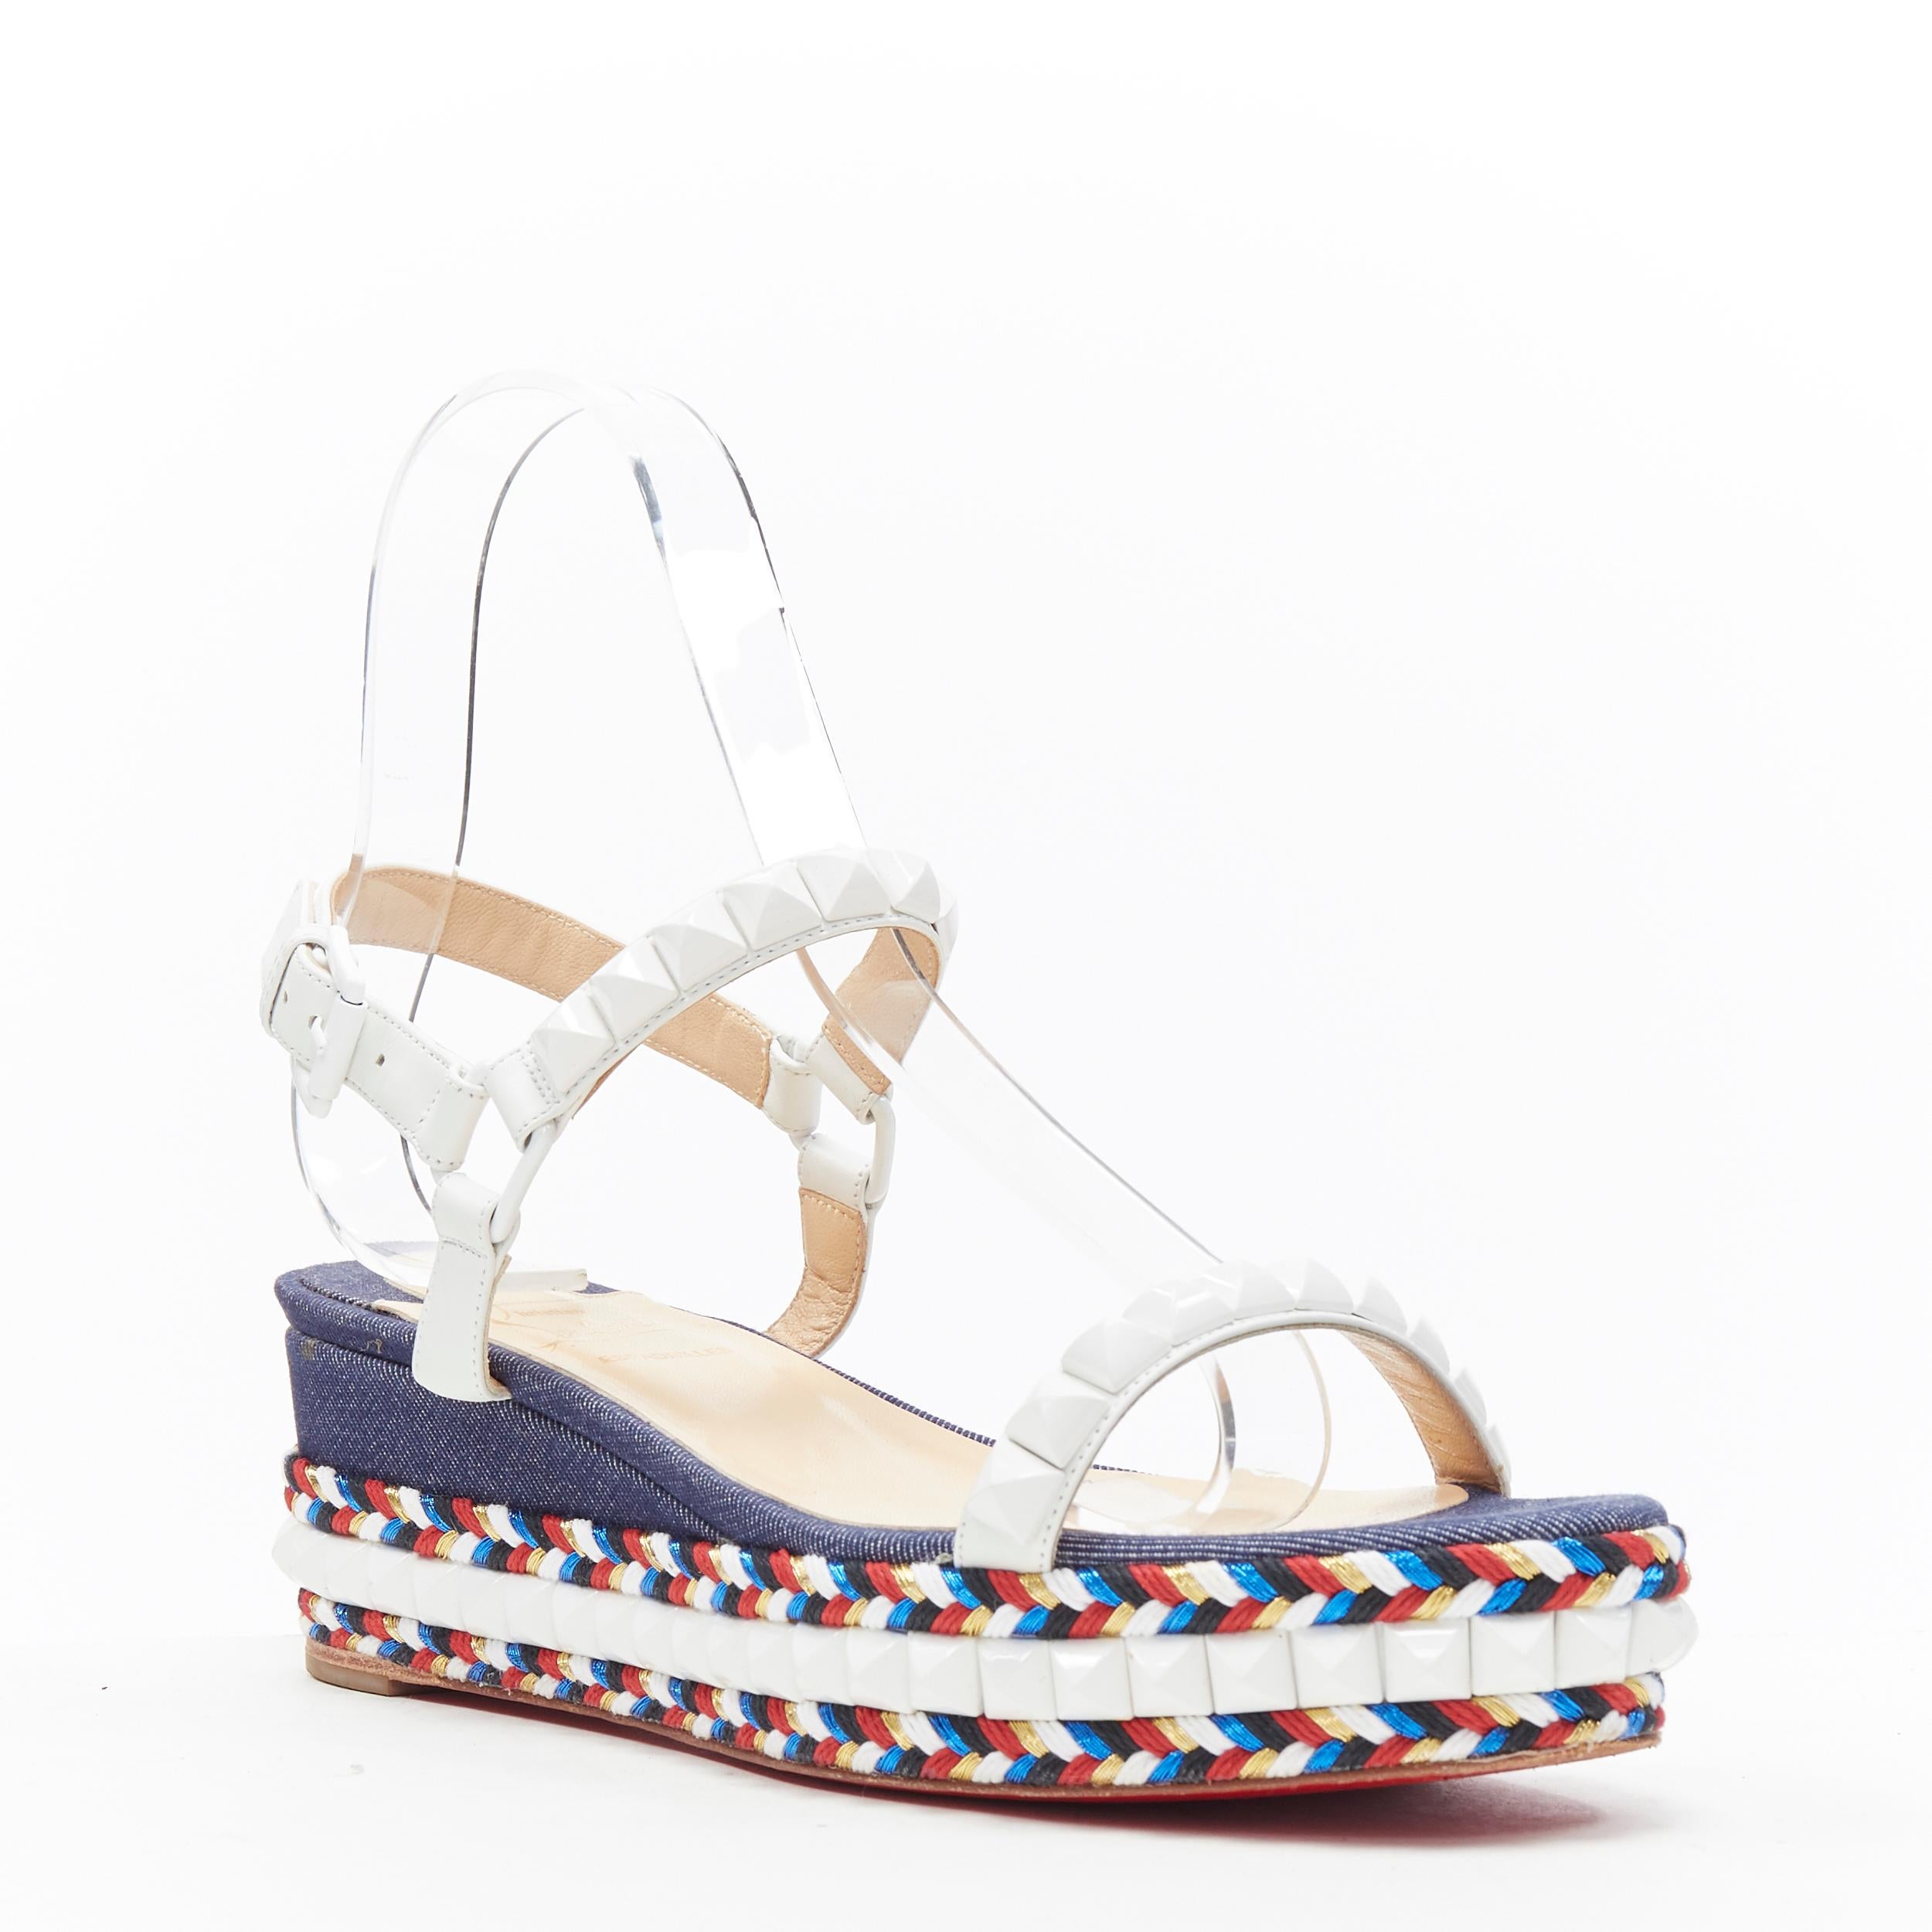 CHRISTIAN LOUBOUTIN Cataclou embroidery denim studded espadrille sandals EU39
Brand: Christian Louboutin
Designer: Christian Louboutin
Model Name / Style: Cataclou
Material: Denim
Color: Blue
Pattern: Abstract
Closure: Ankle strap
Extra Detail: Mid